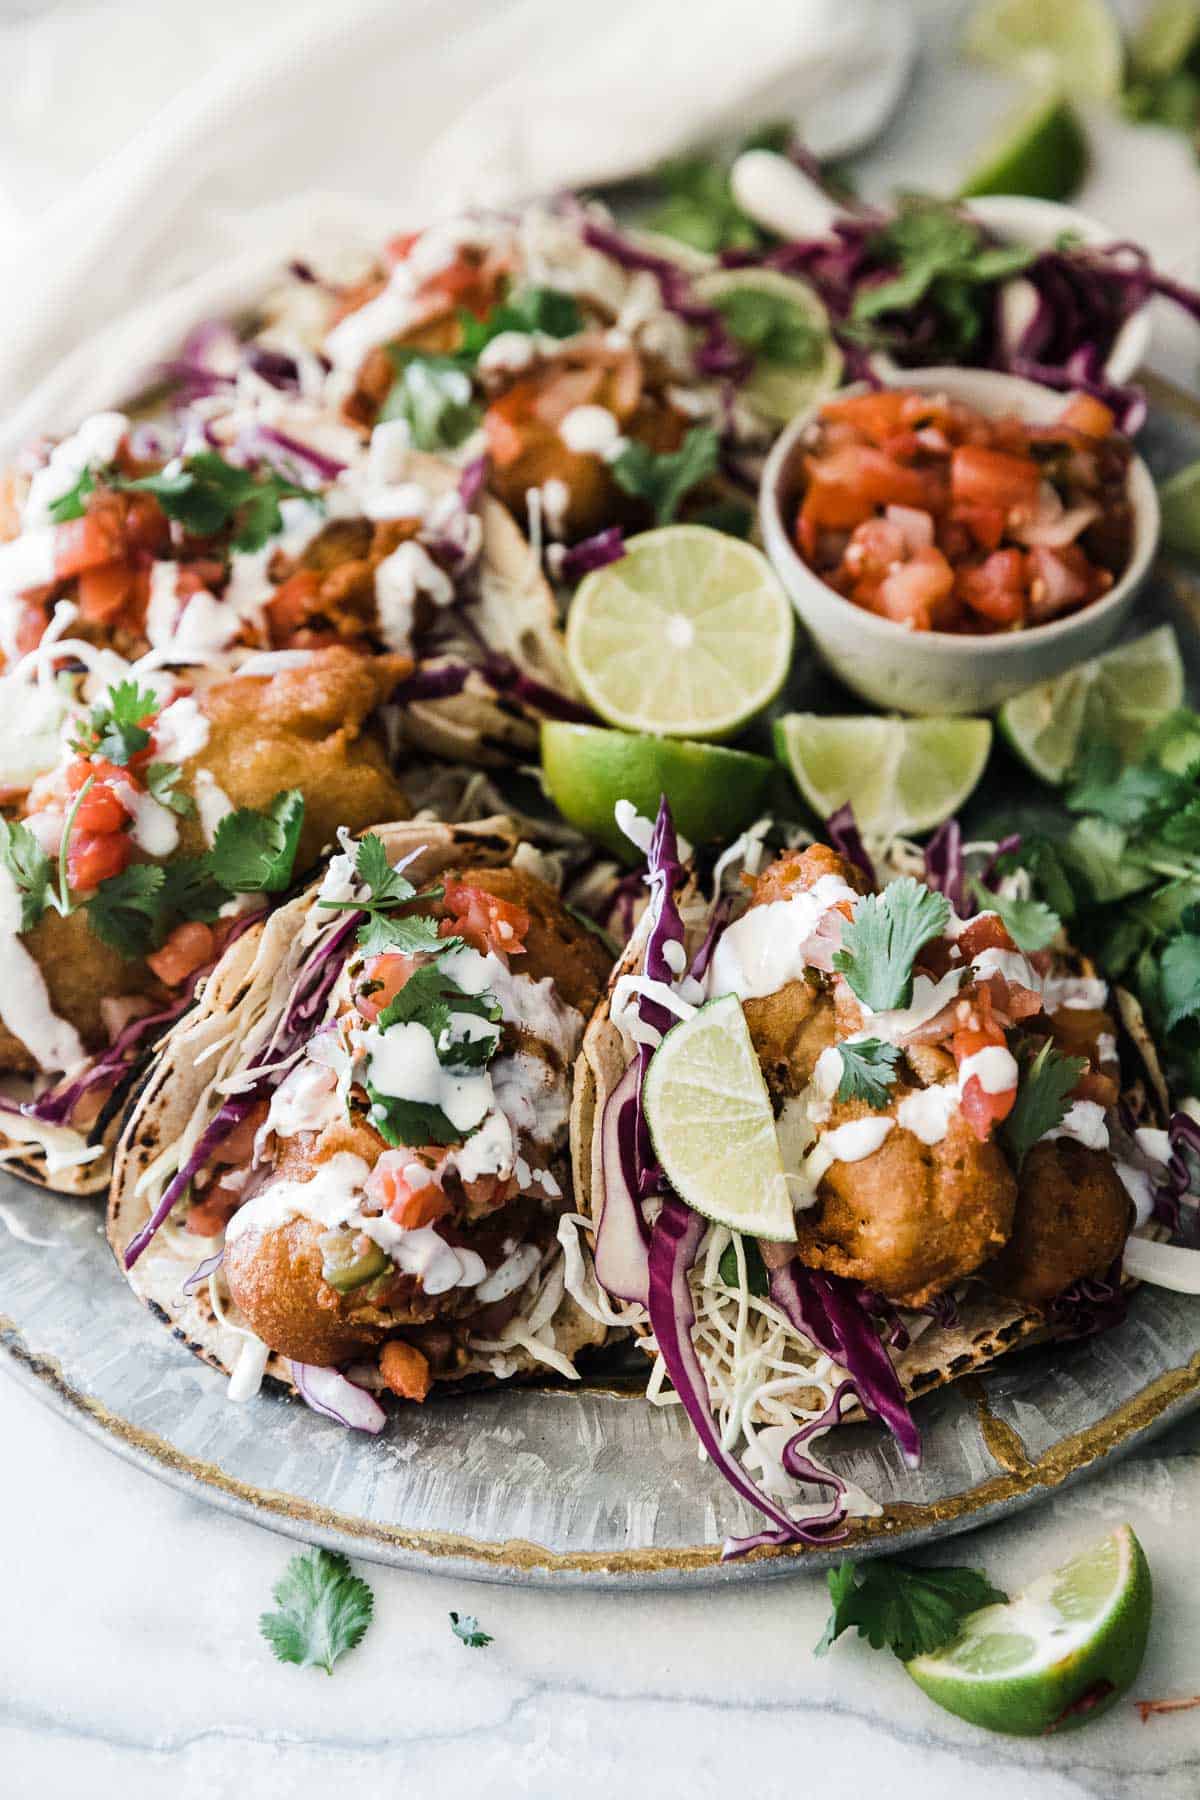 A ¾ view of beer battered fish tacos on a round silver platter. They are garnished with cilantro and pico.